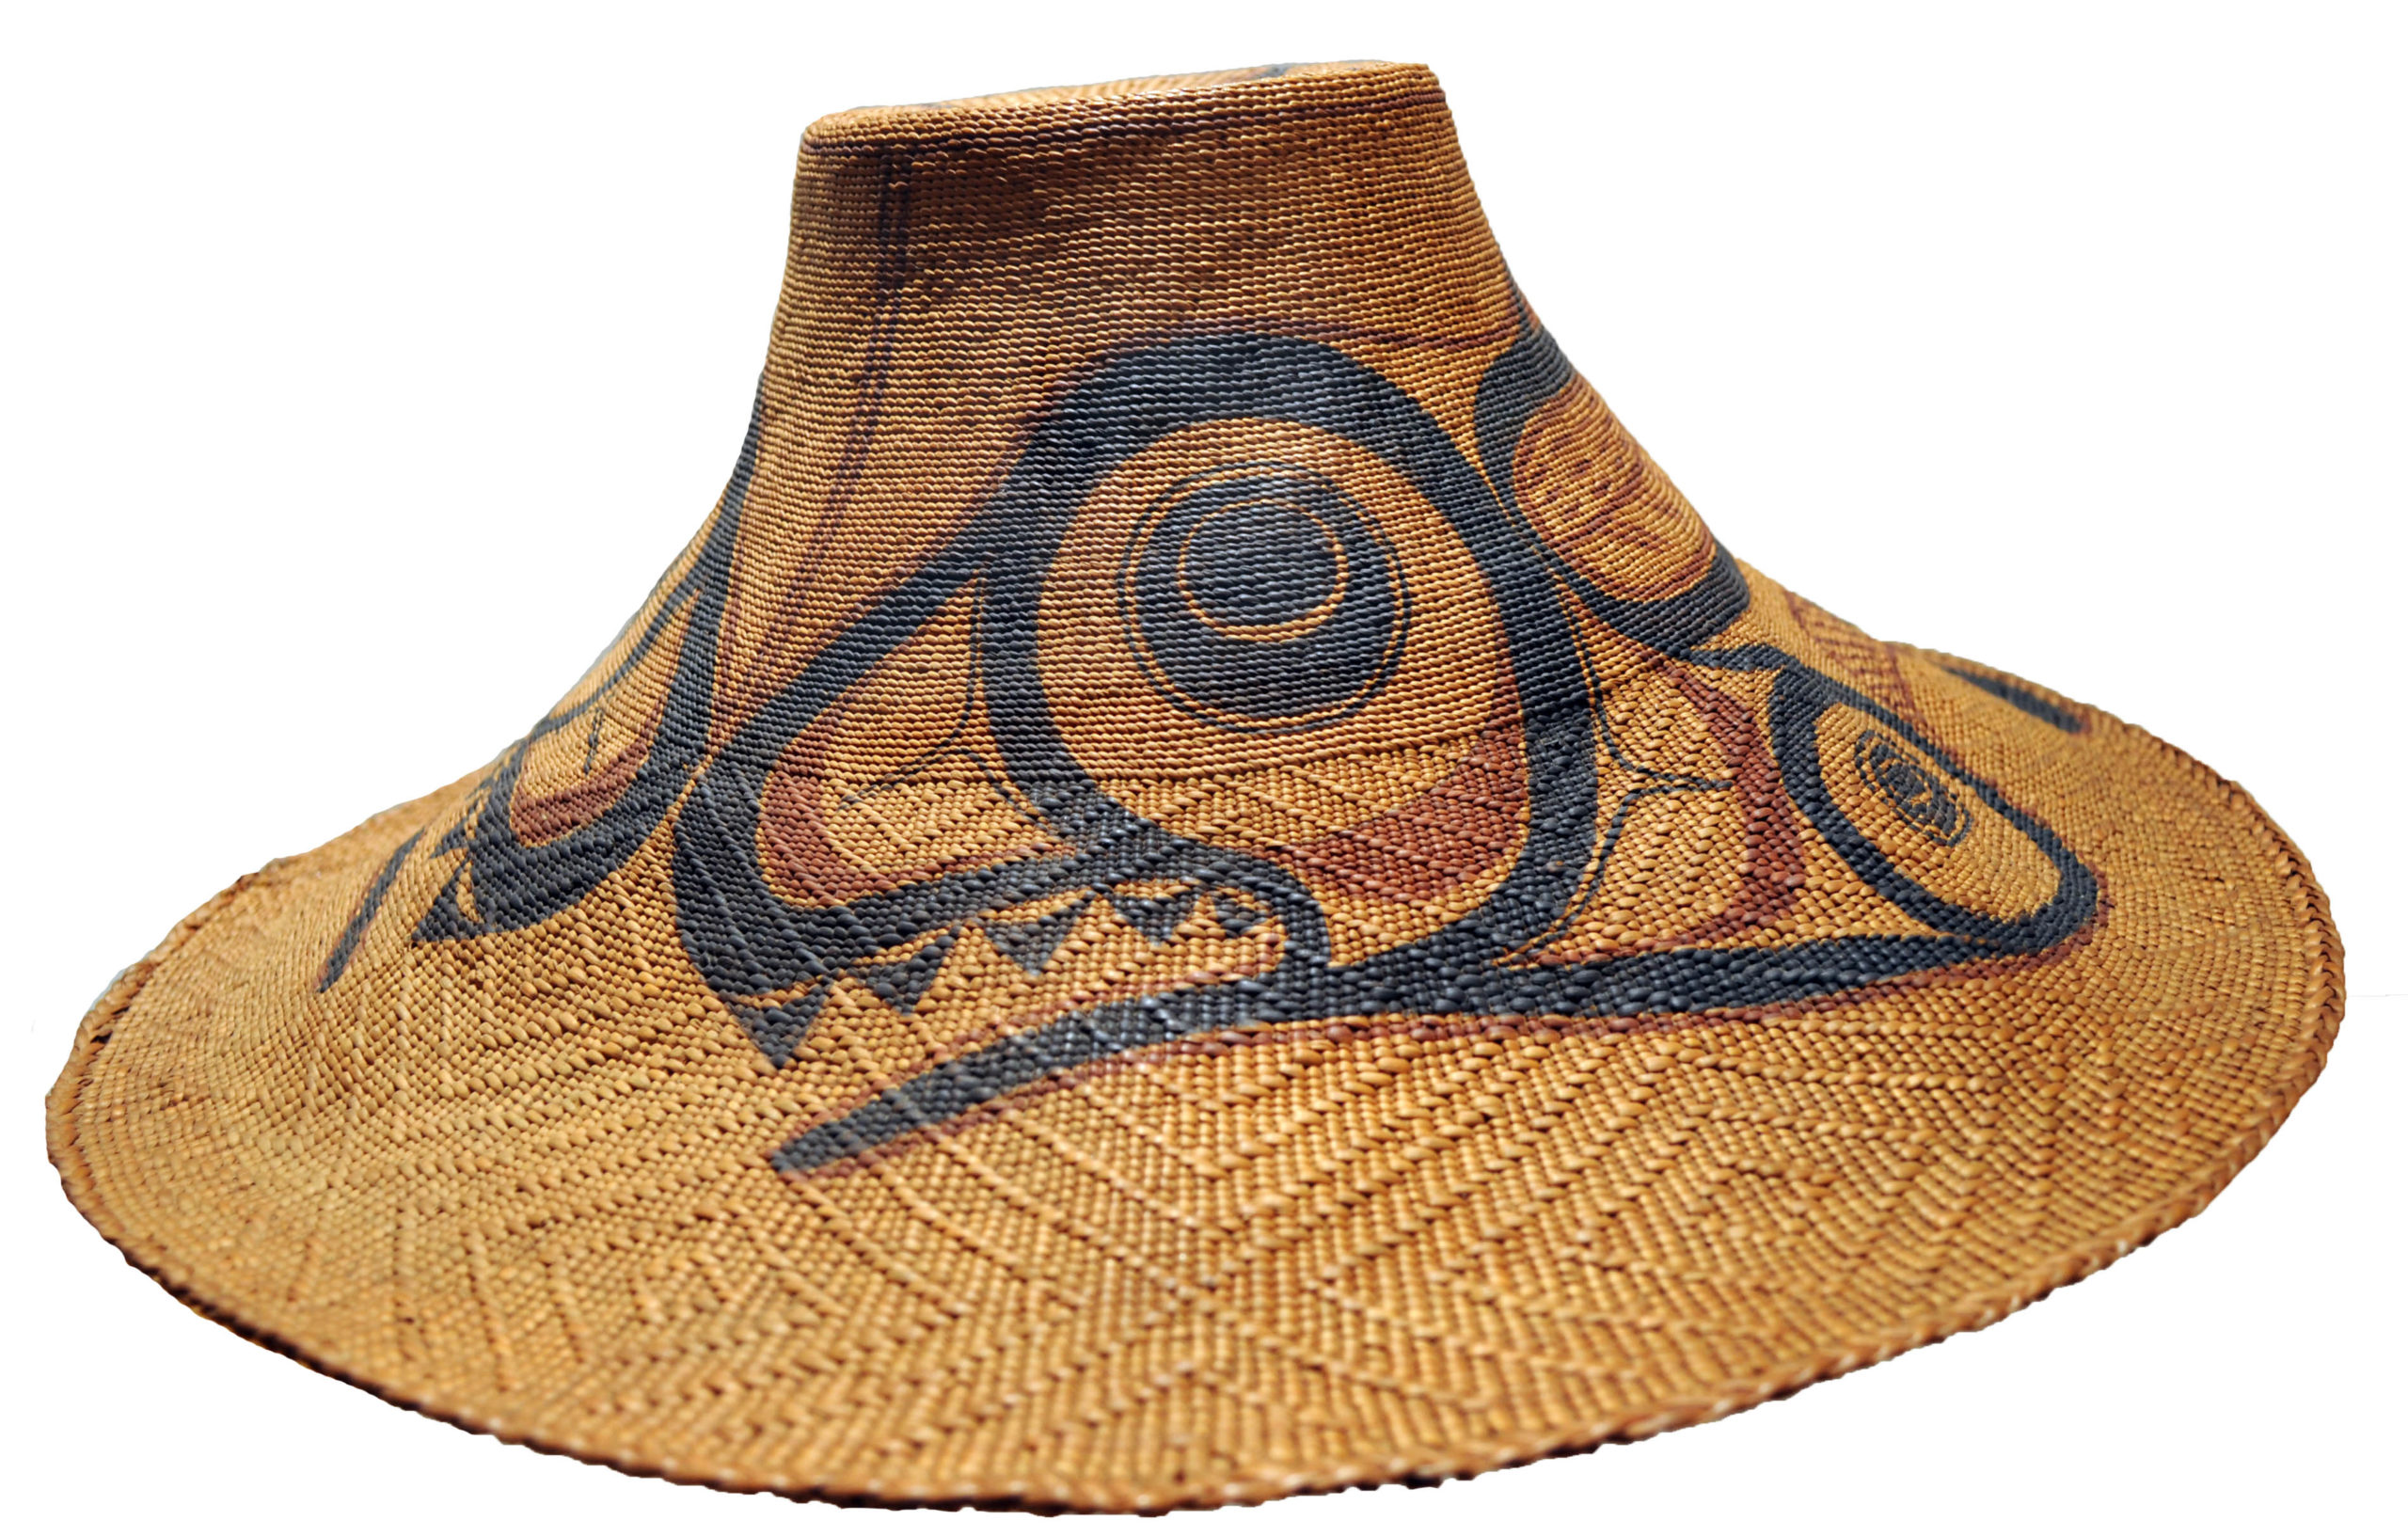 Isabella Edenshaw (Haida), weaver, and Charles Edenshaw (Haida), painter, spruce root hat with killerwhale crest, c. 1885, spruce root and paint (Seattle Art Museum; photo: Joe Mabel, CC BY-SA 3.0)